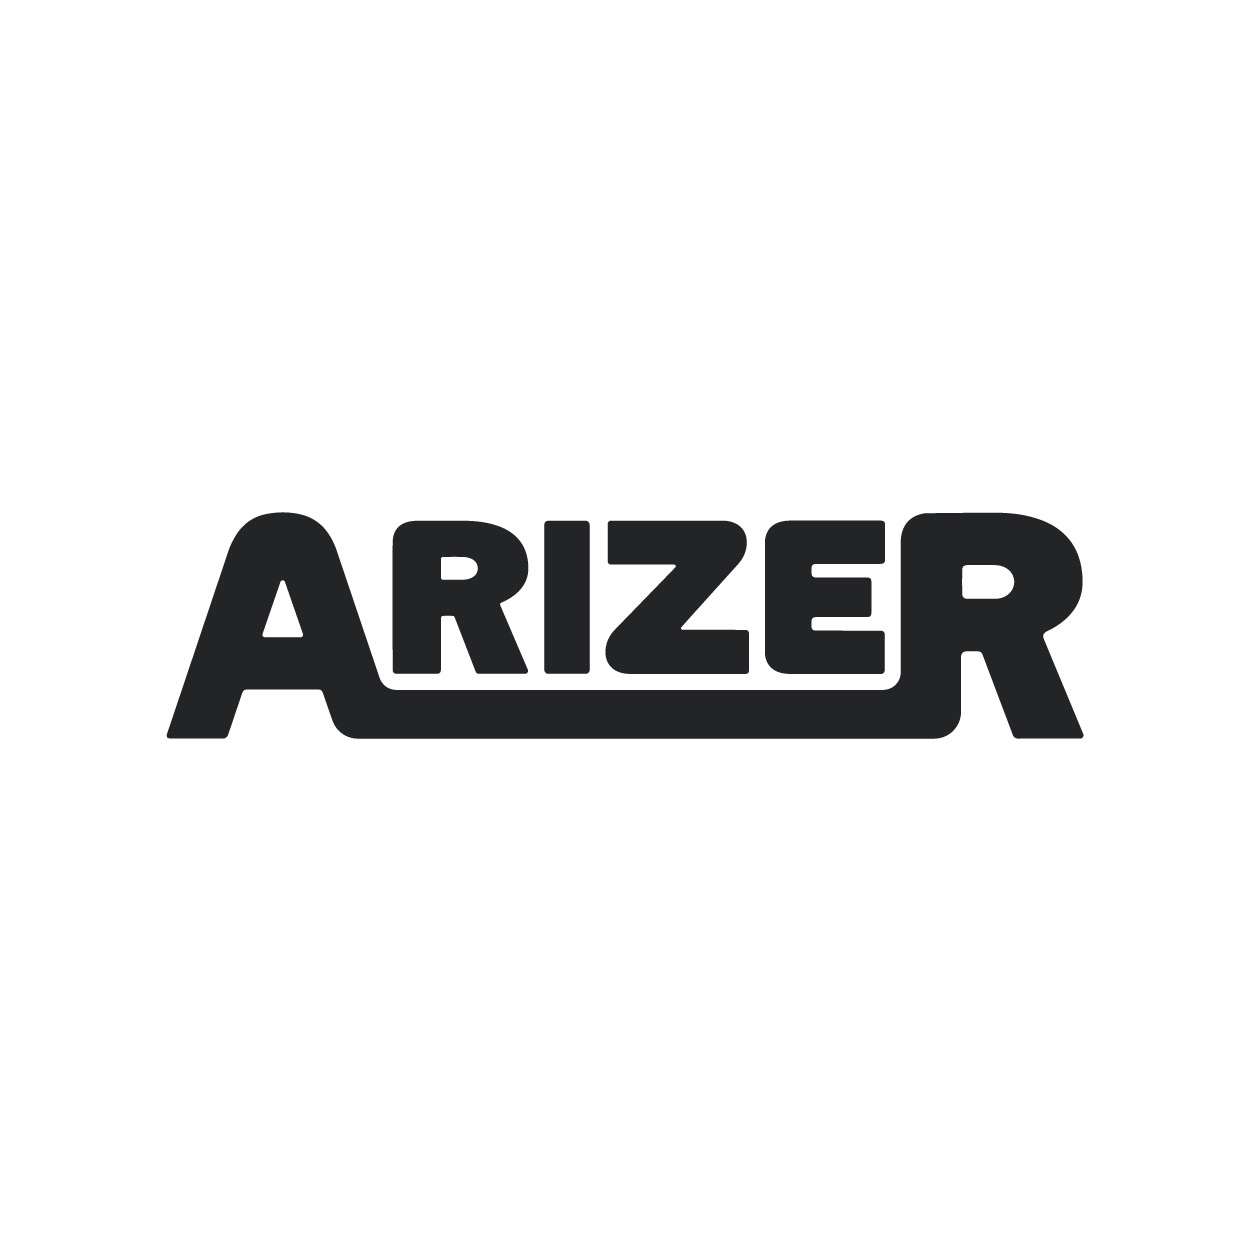 Arizer Coupons & Promo Codes